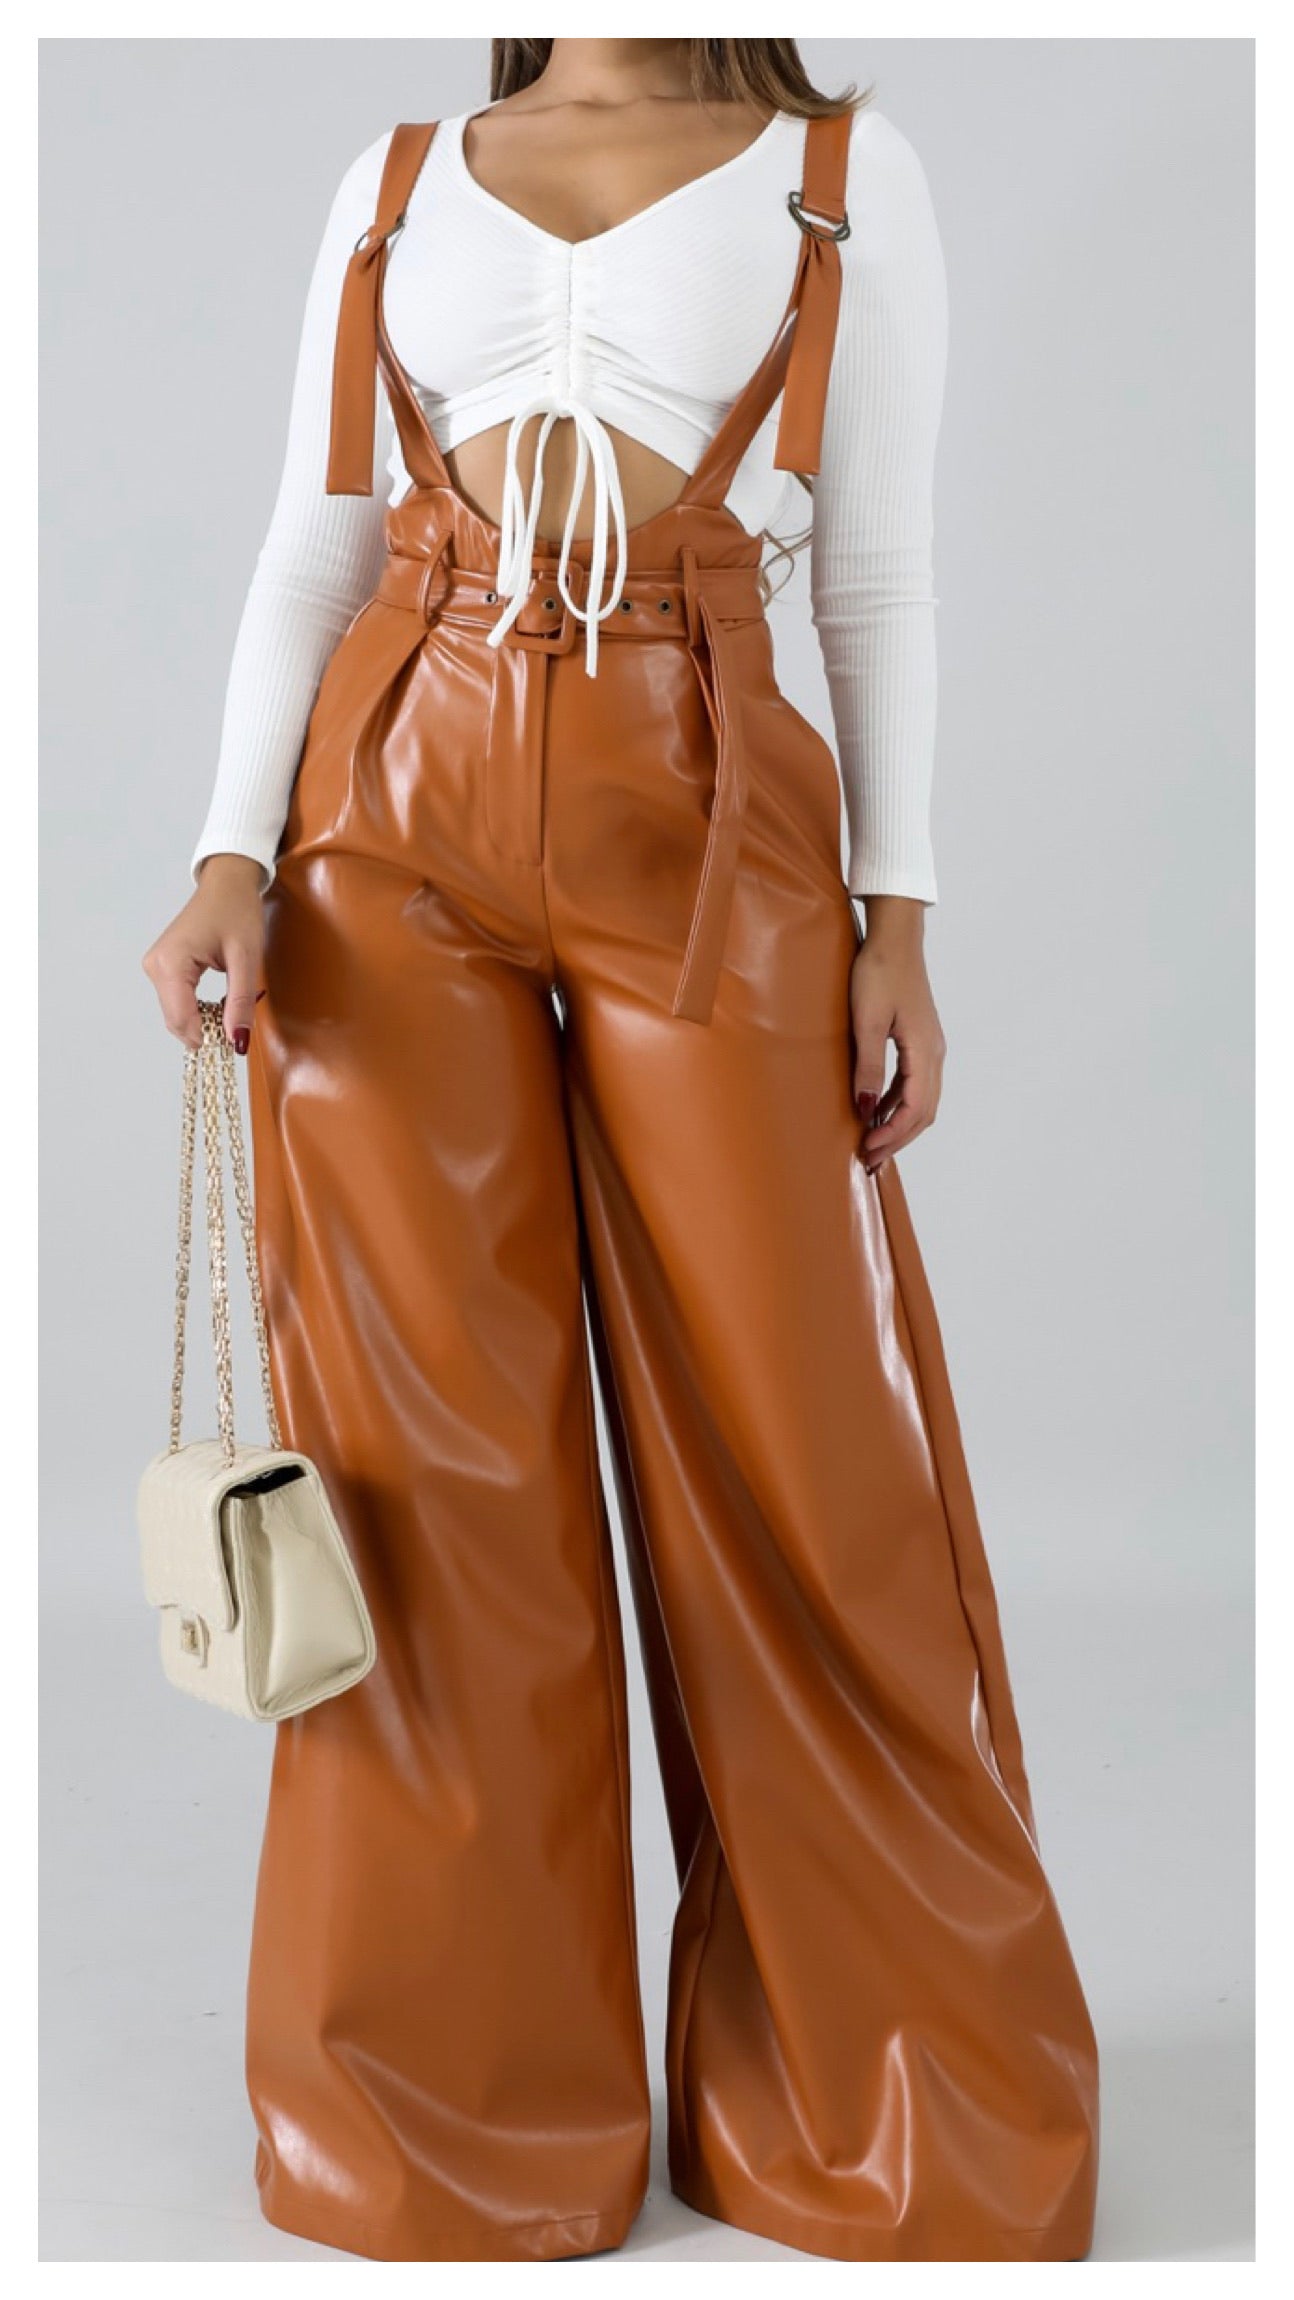 Suspended in My Wide Leg Faux Leather Pants (Caramel)